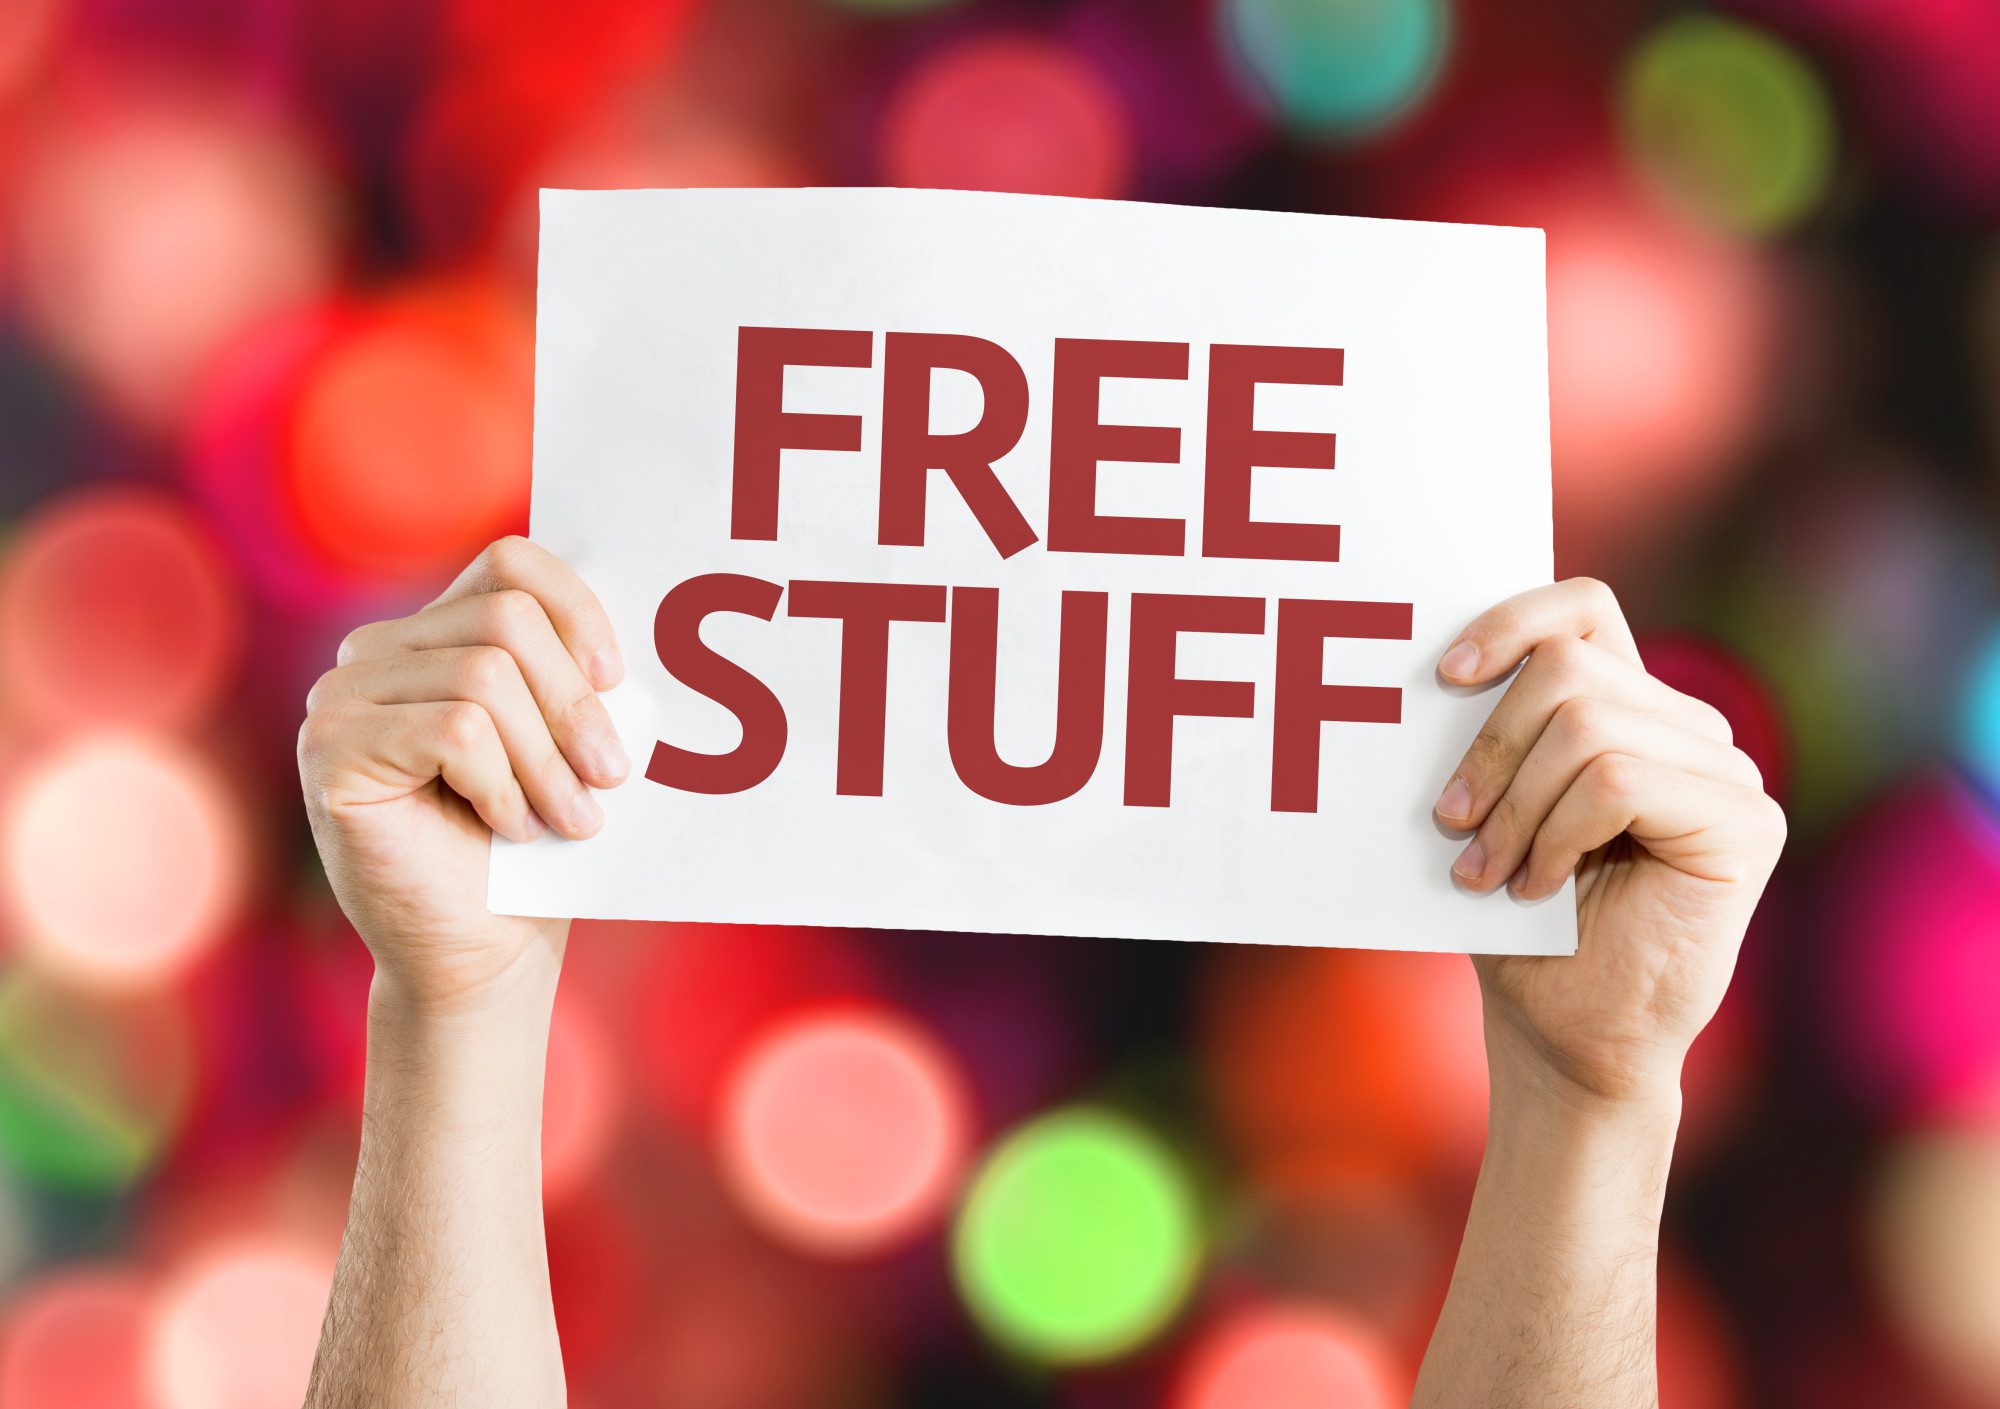 Free Stuff card with colorful background